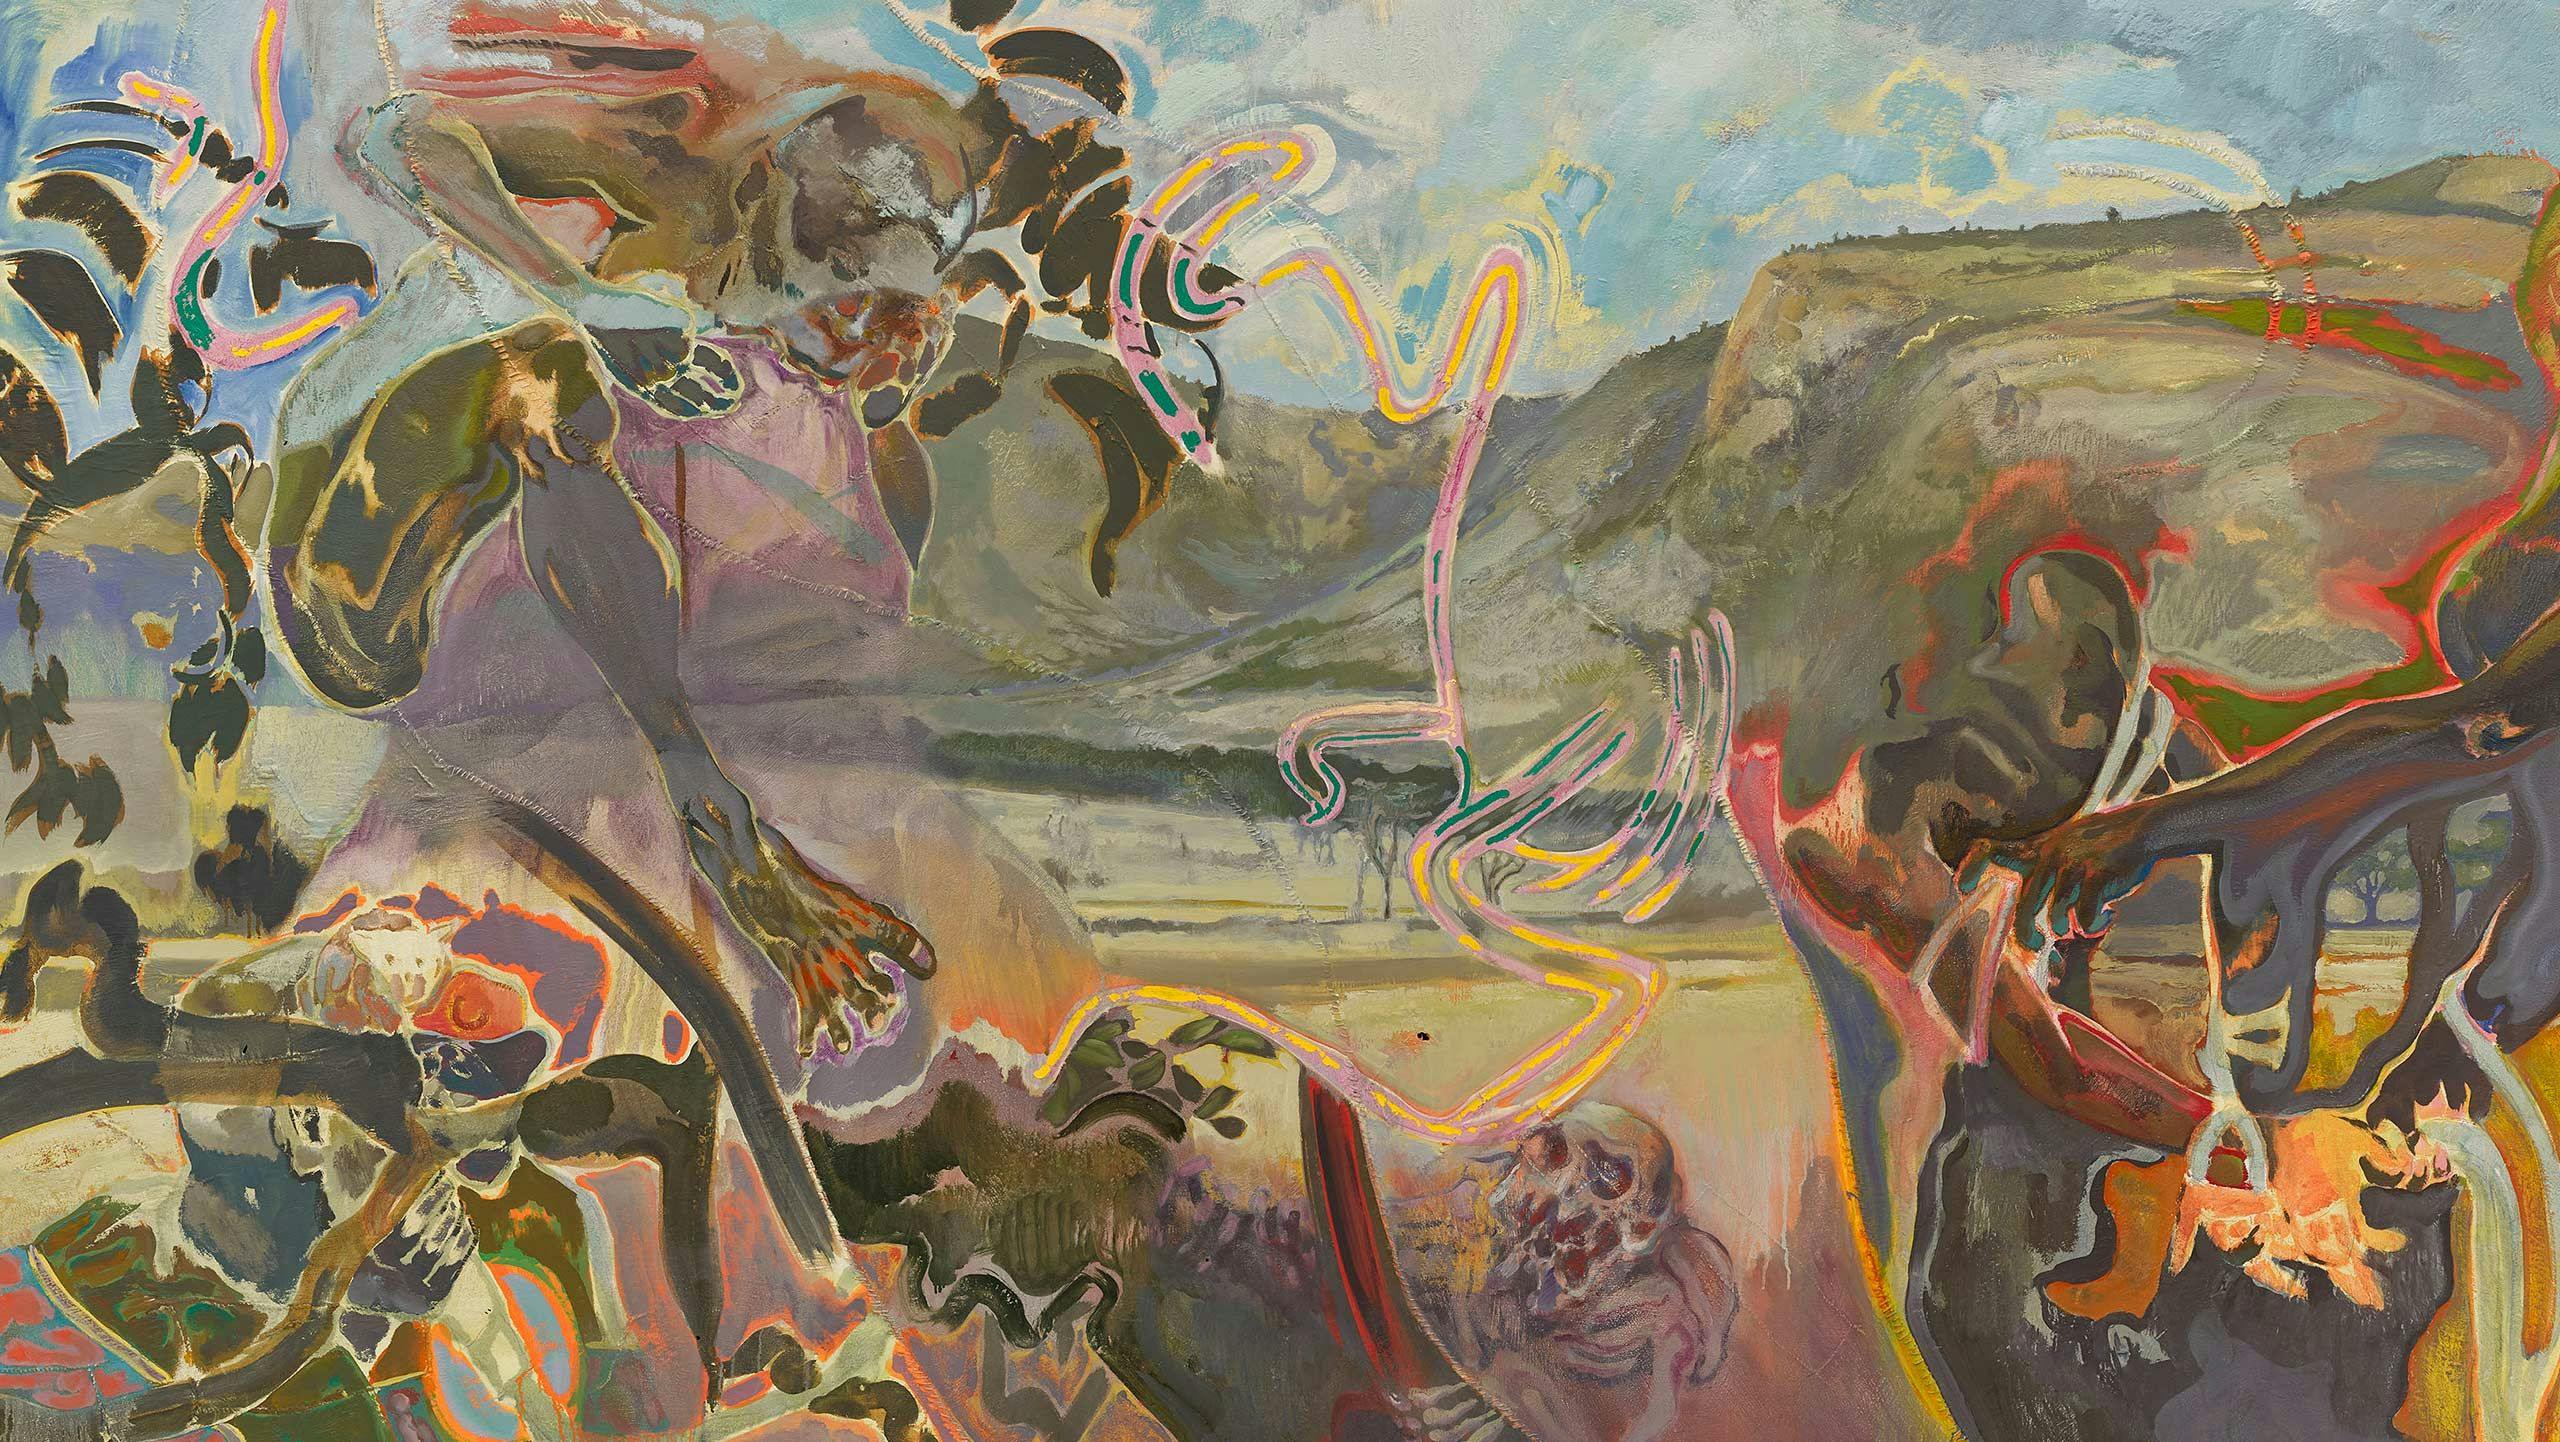 A painting by Michael Armitage, titled Enasoit, dated 2019.